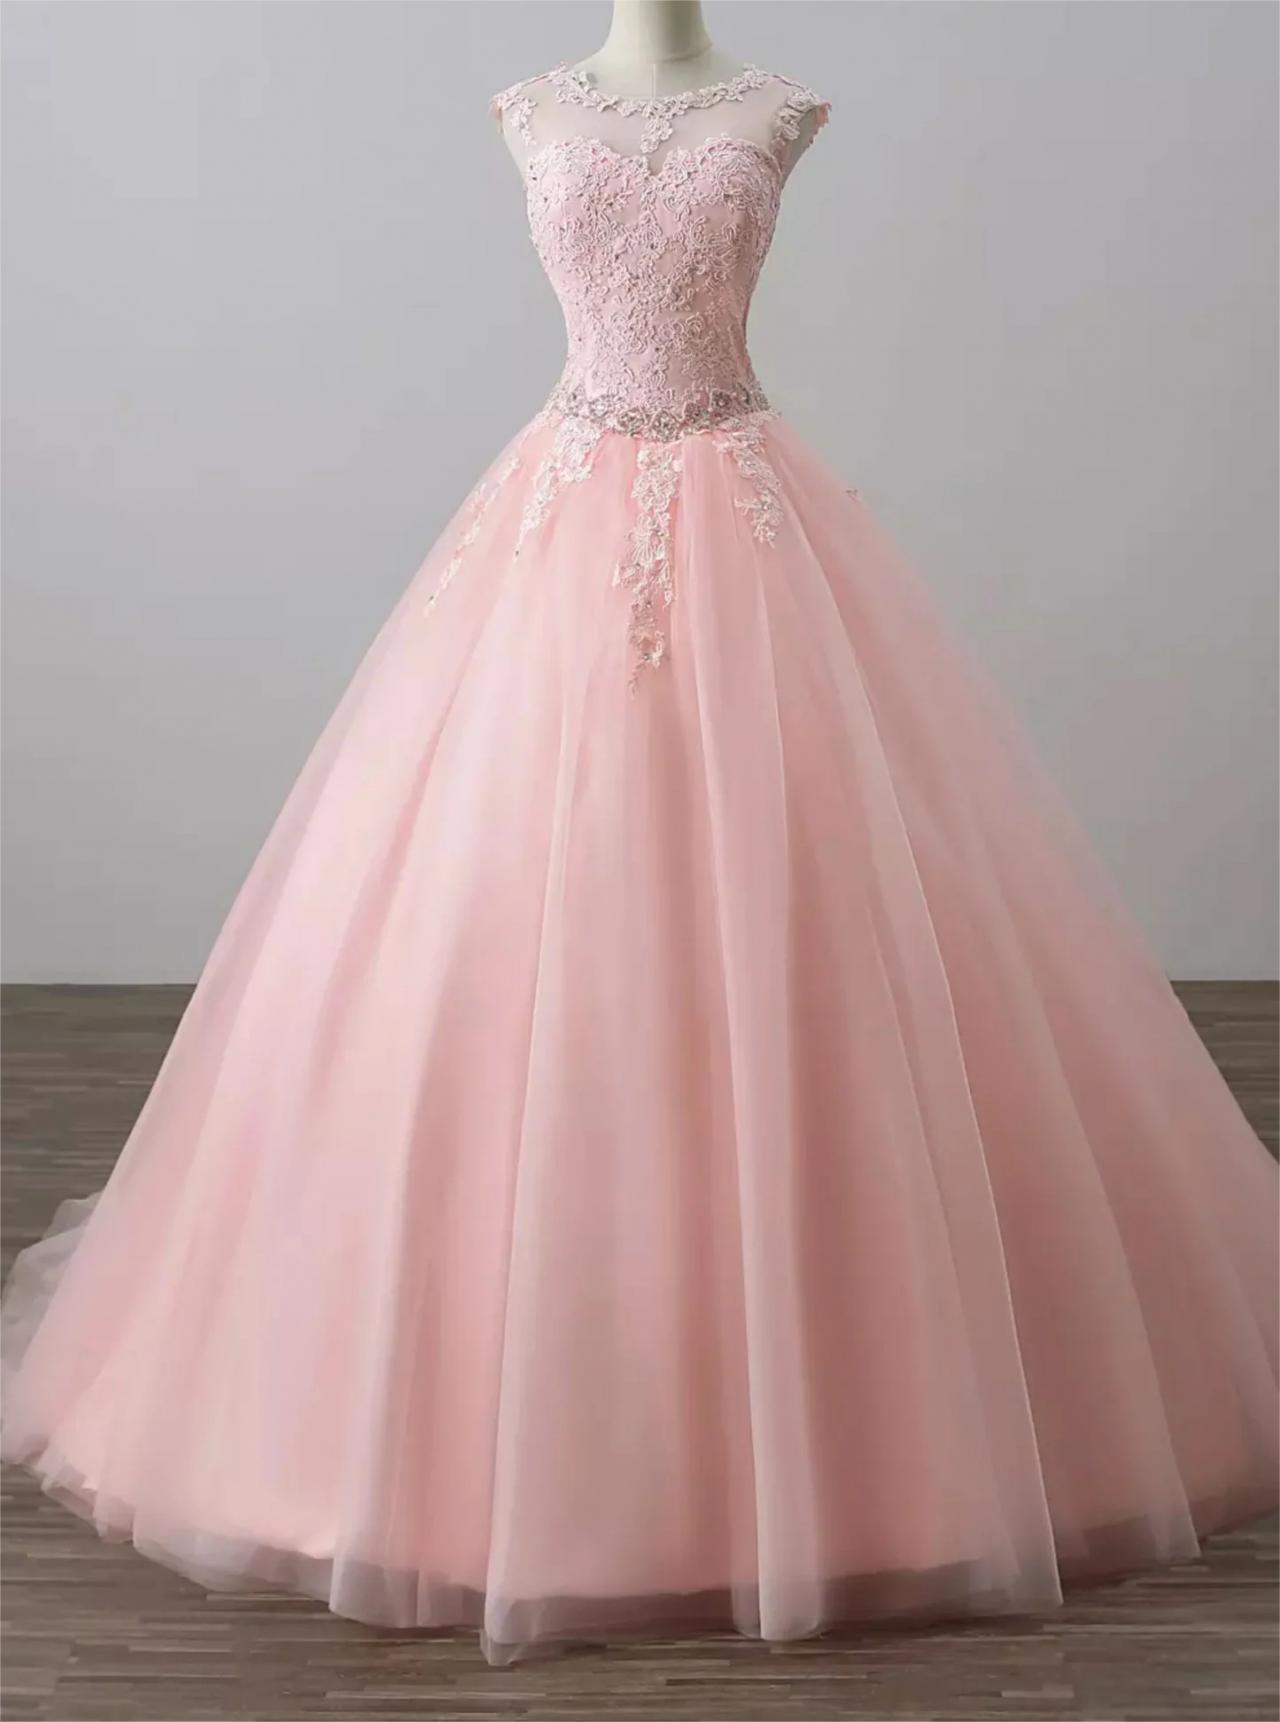 Women A-line Tulle Lace Prom Dresses Long Appliques Evening Party Gowns Sleeveless Formal Dress Yp122